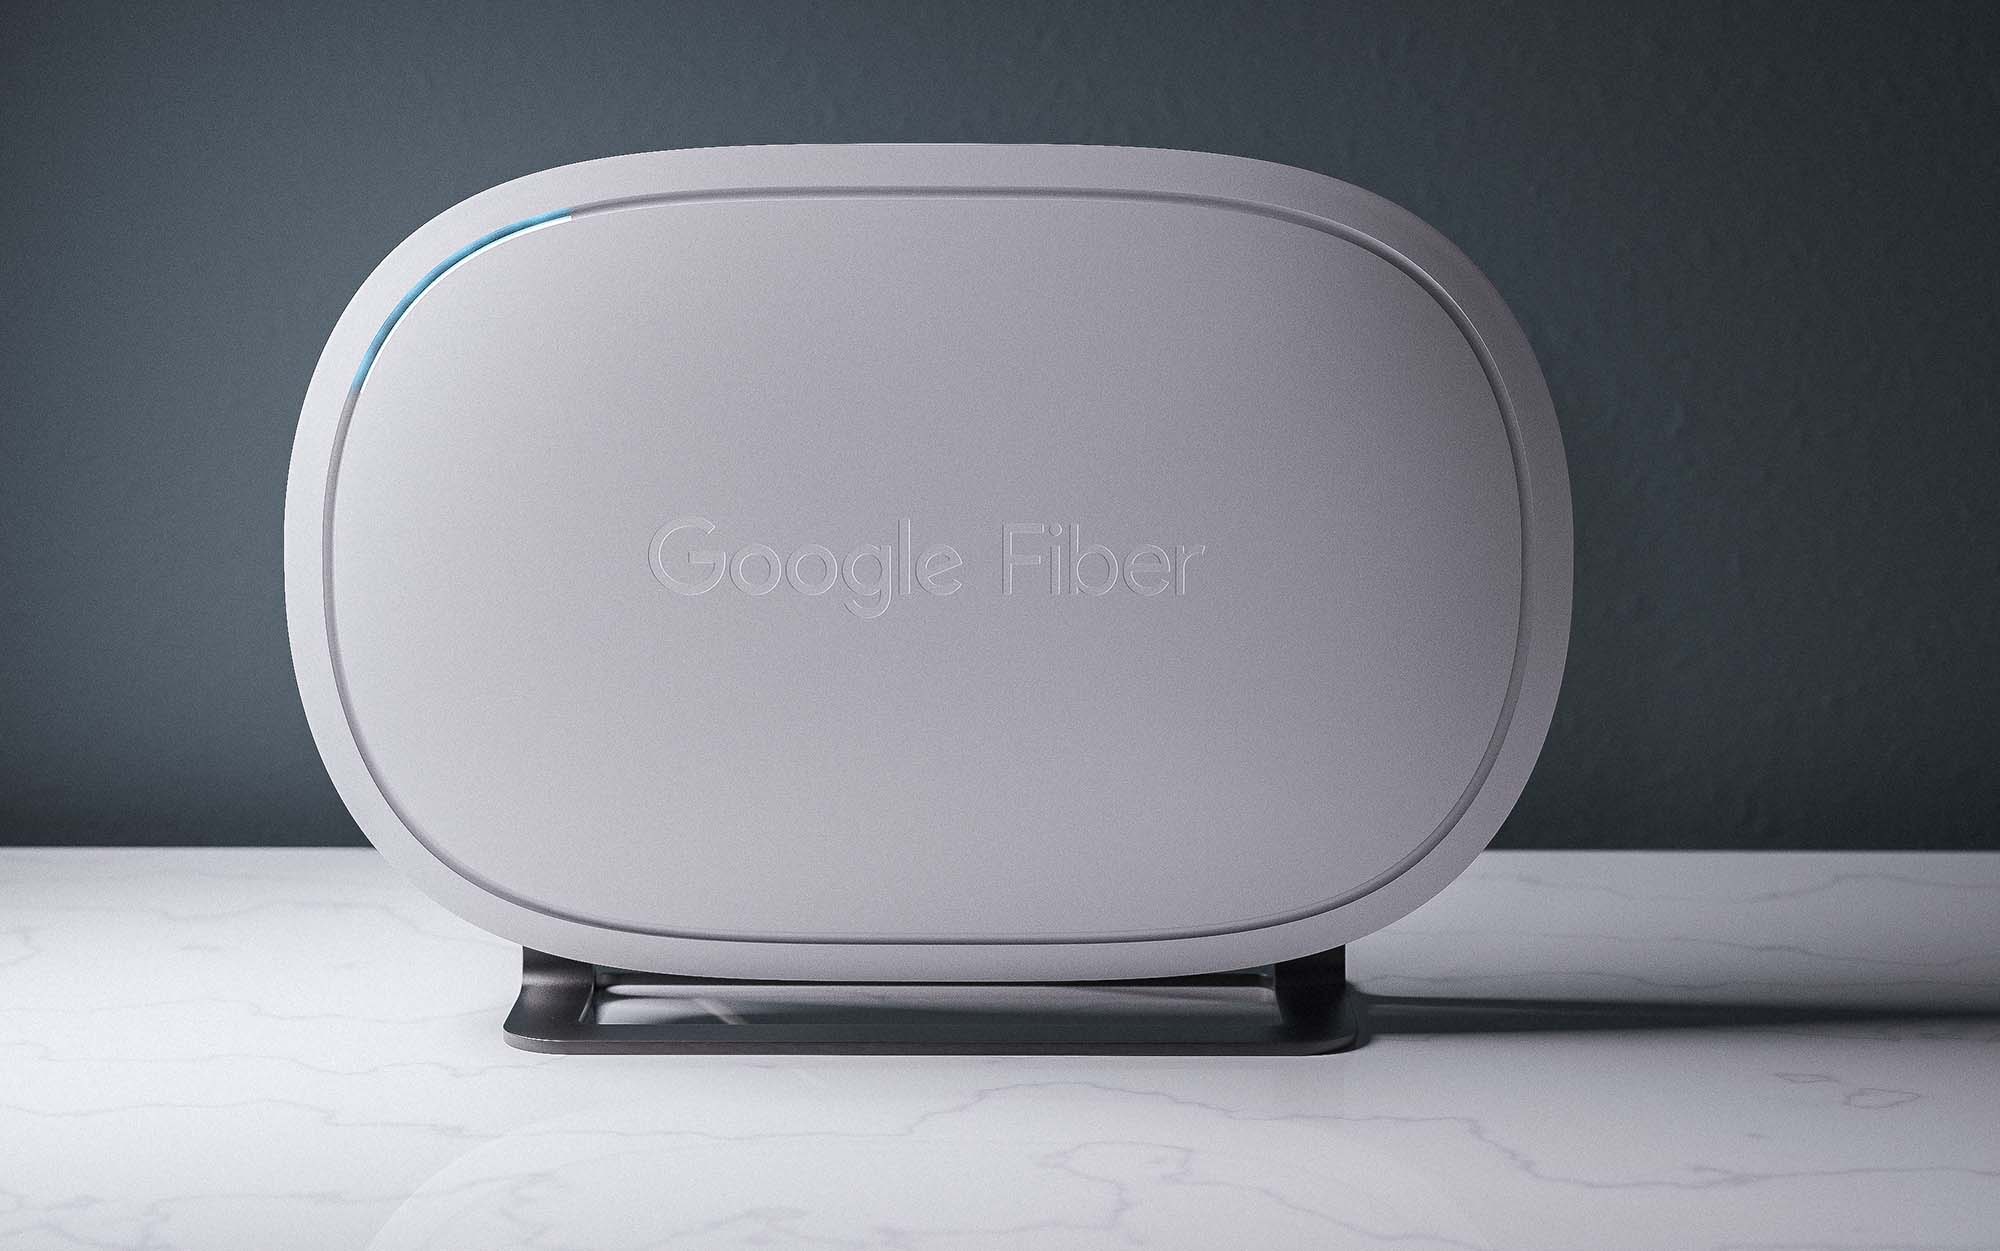 Close-up view of the new Google Fiber product design